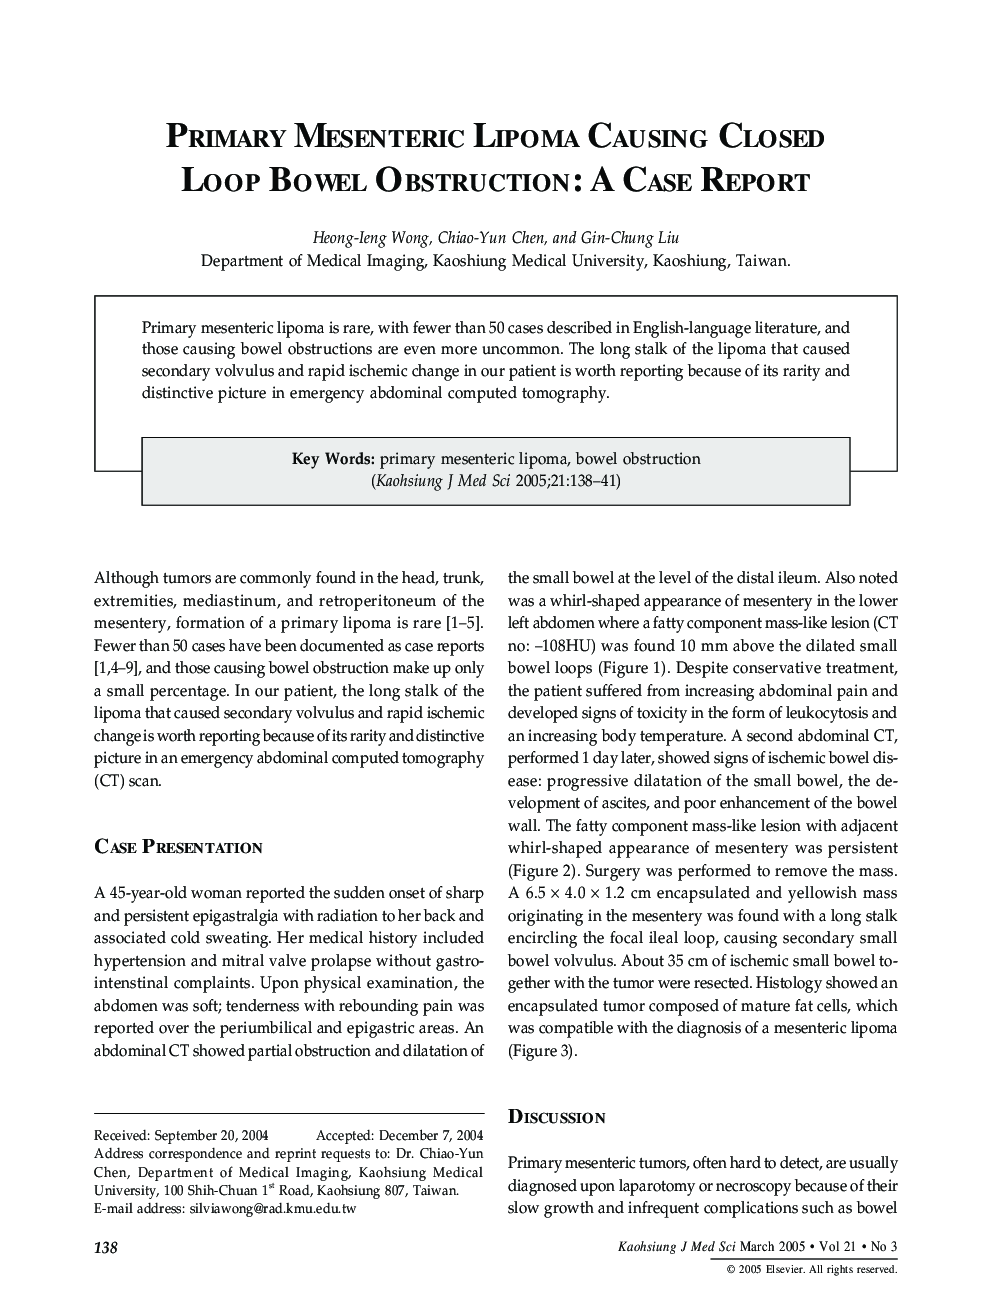 Primary Mesenteric Lipoma Causing Closed Loop Bowel Obstruction: A Case Report